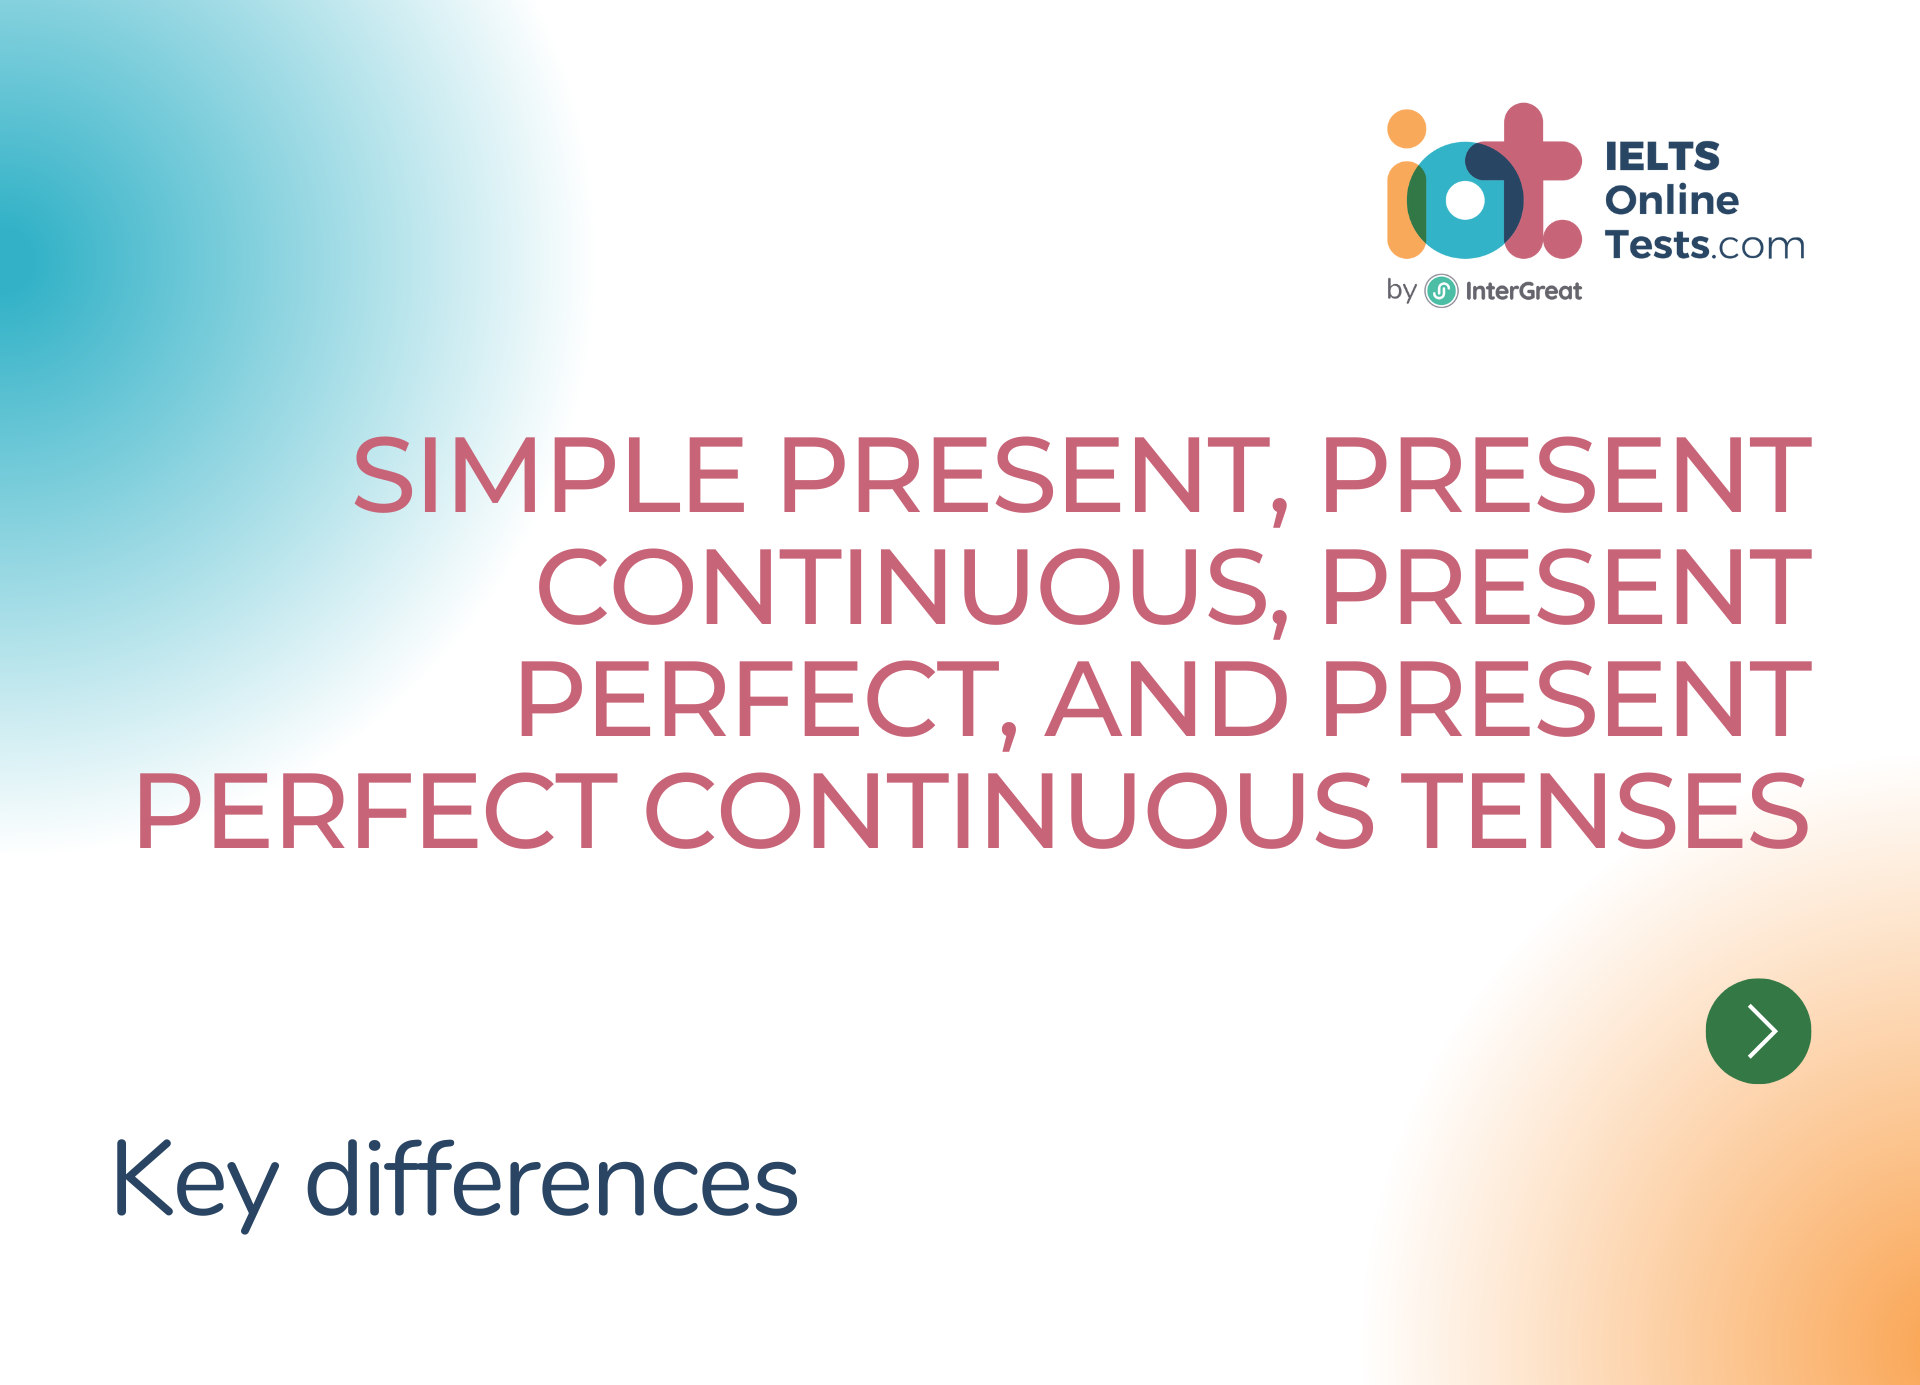 Key differences between the simple present, present continuous, present perfect, and present perfect continuous tenses